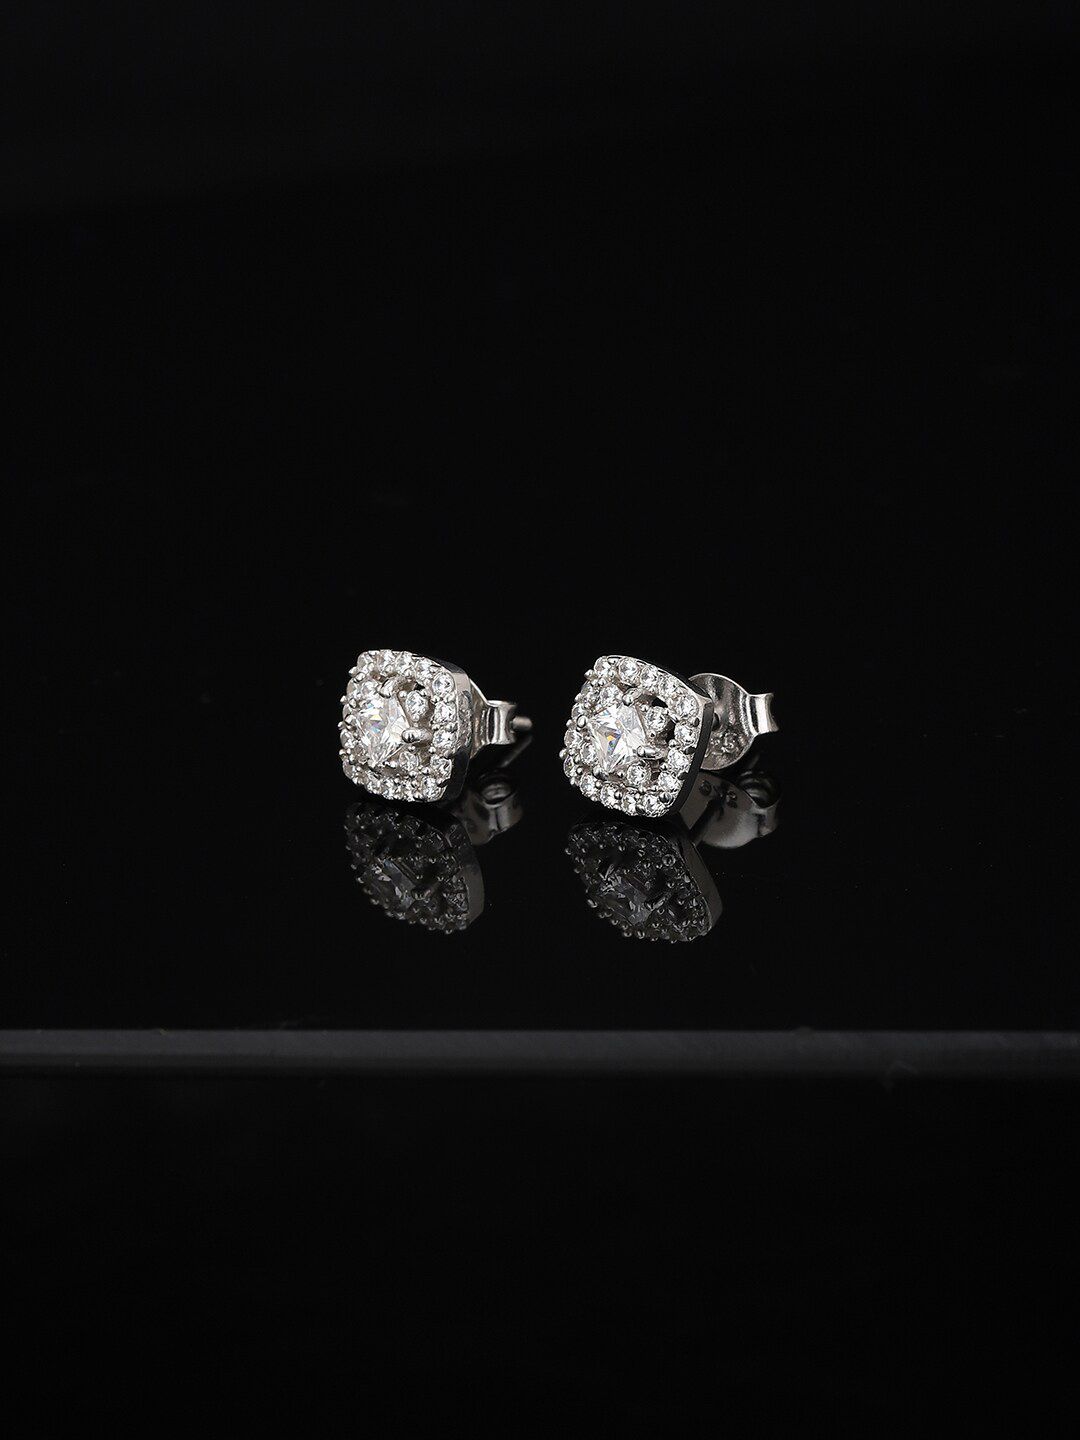 VANBELLE 925 Sterling Silver Square Studs Earrings Price in India